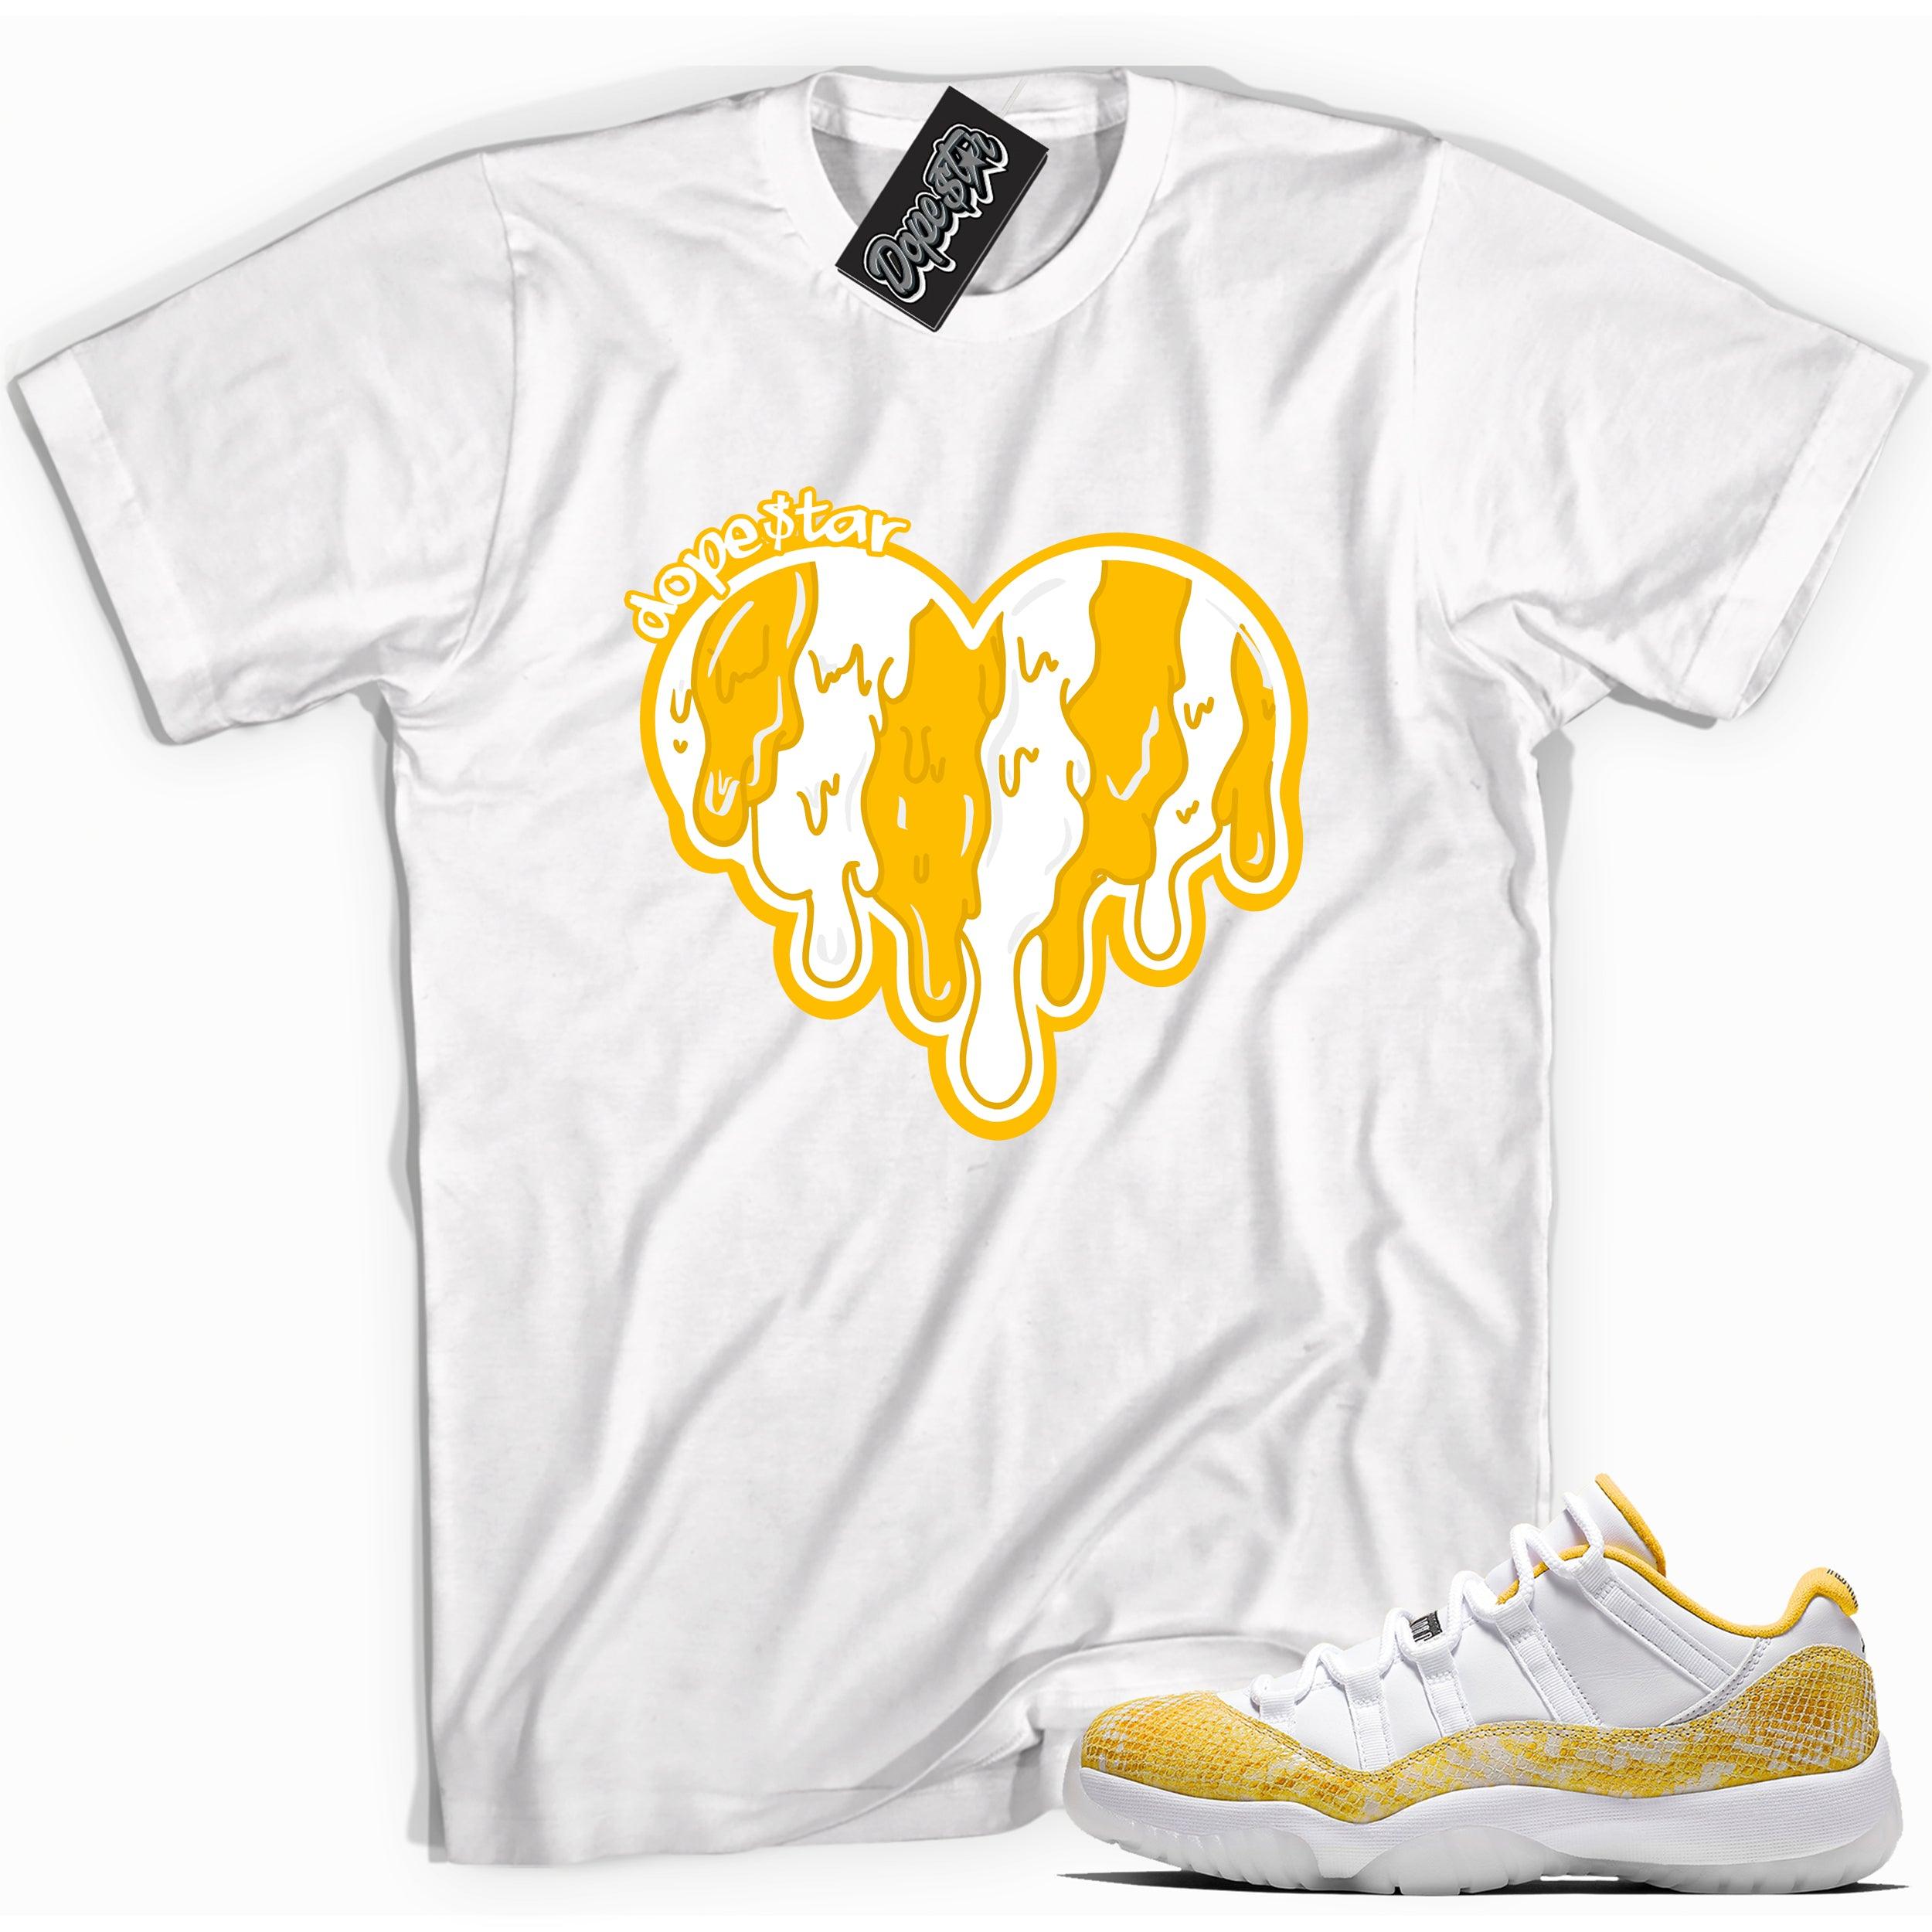 Cool white graphic tee with 'melting heart' print, that perfectly matches Air Jordan 11 Low Yellow Snakeskin sneakers